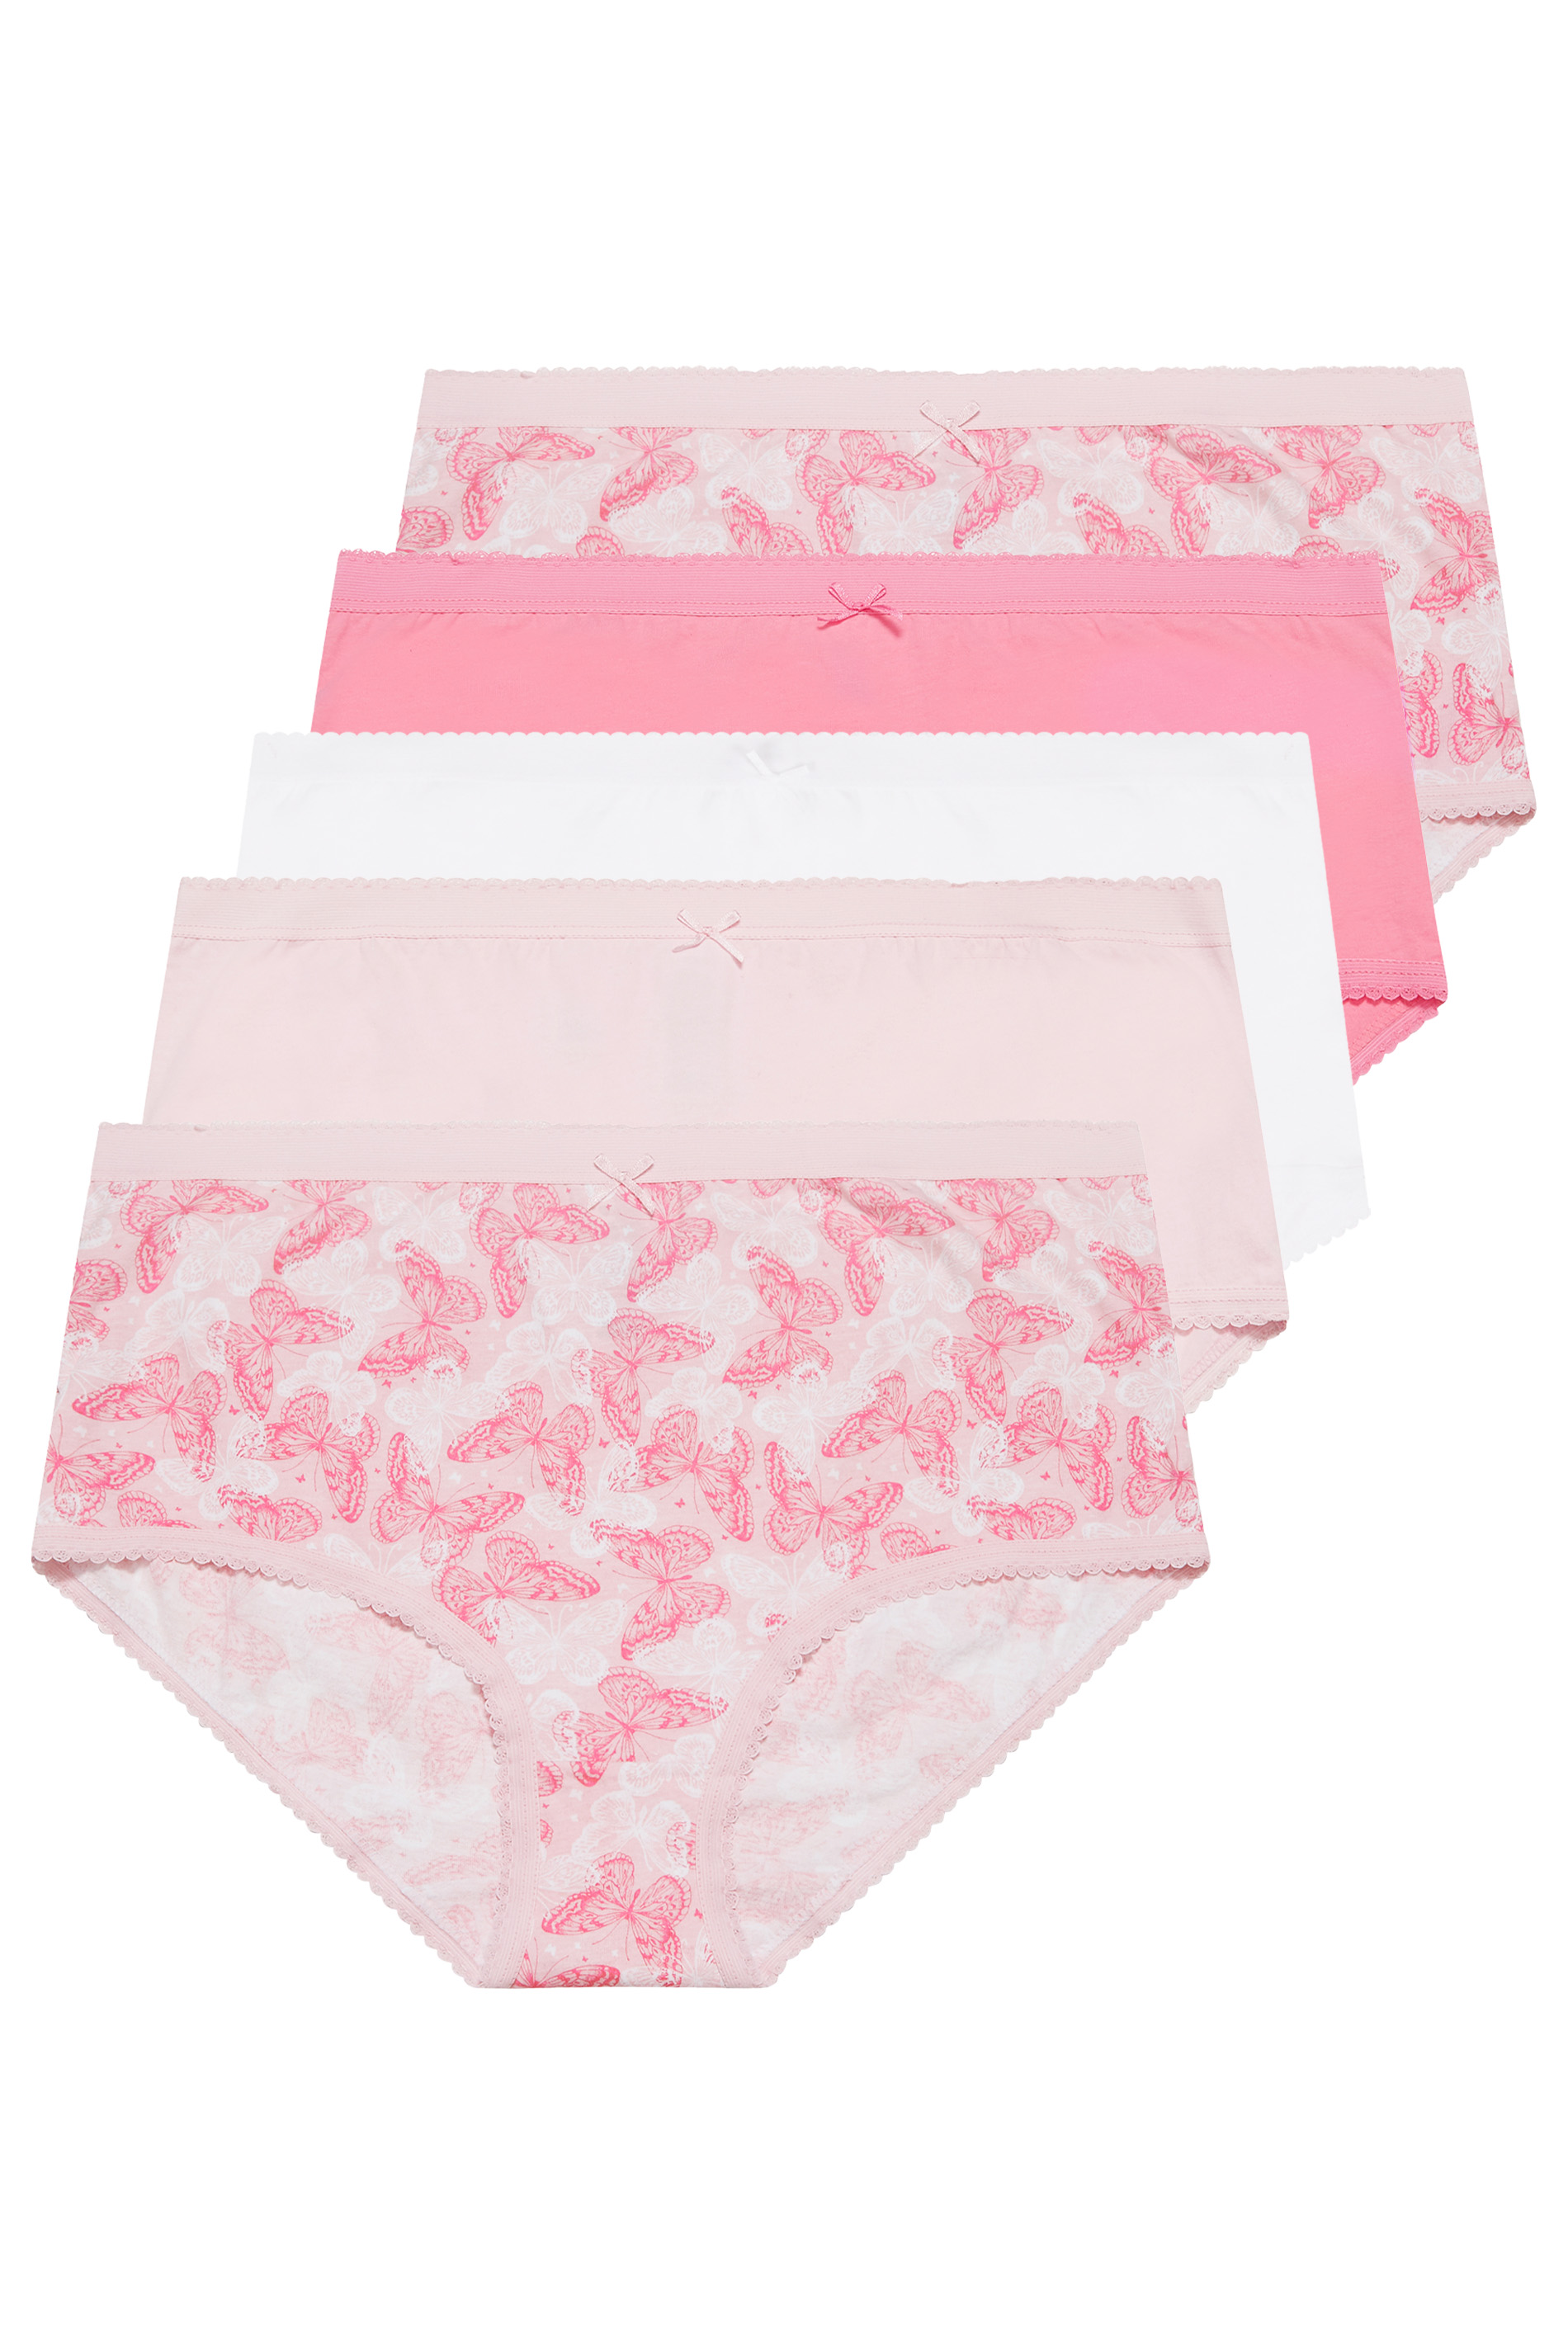 Plus Size 5 PACK Light Pink Butterfly Print Full Briefs | Yours Clothing  3